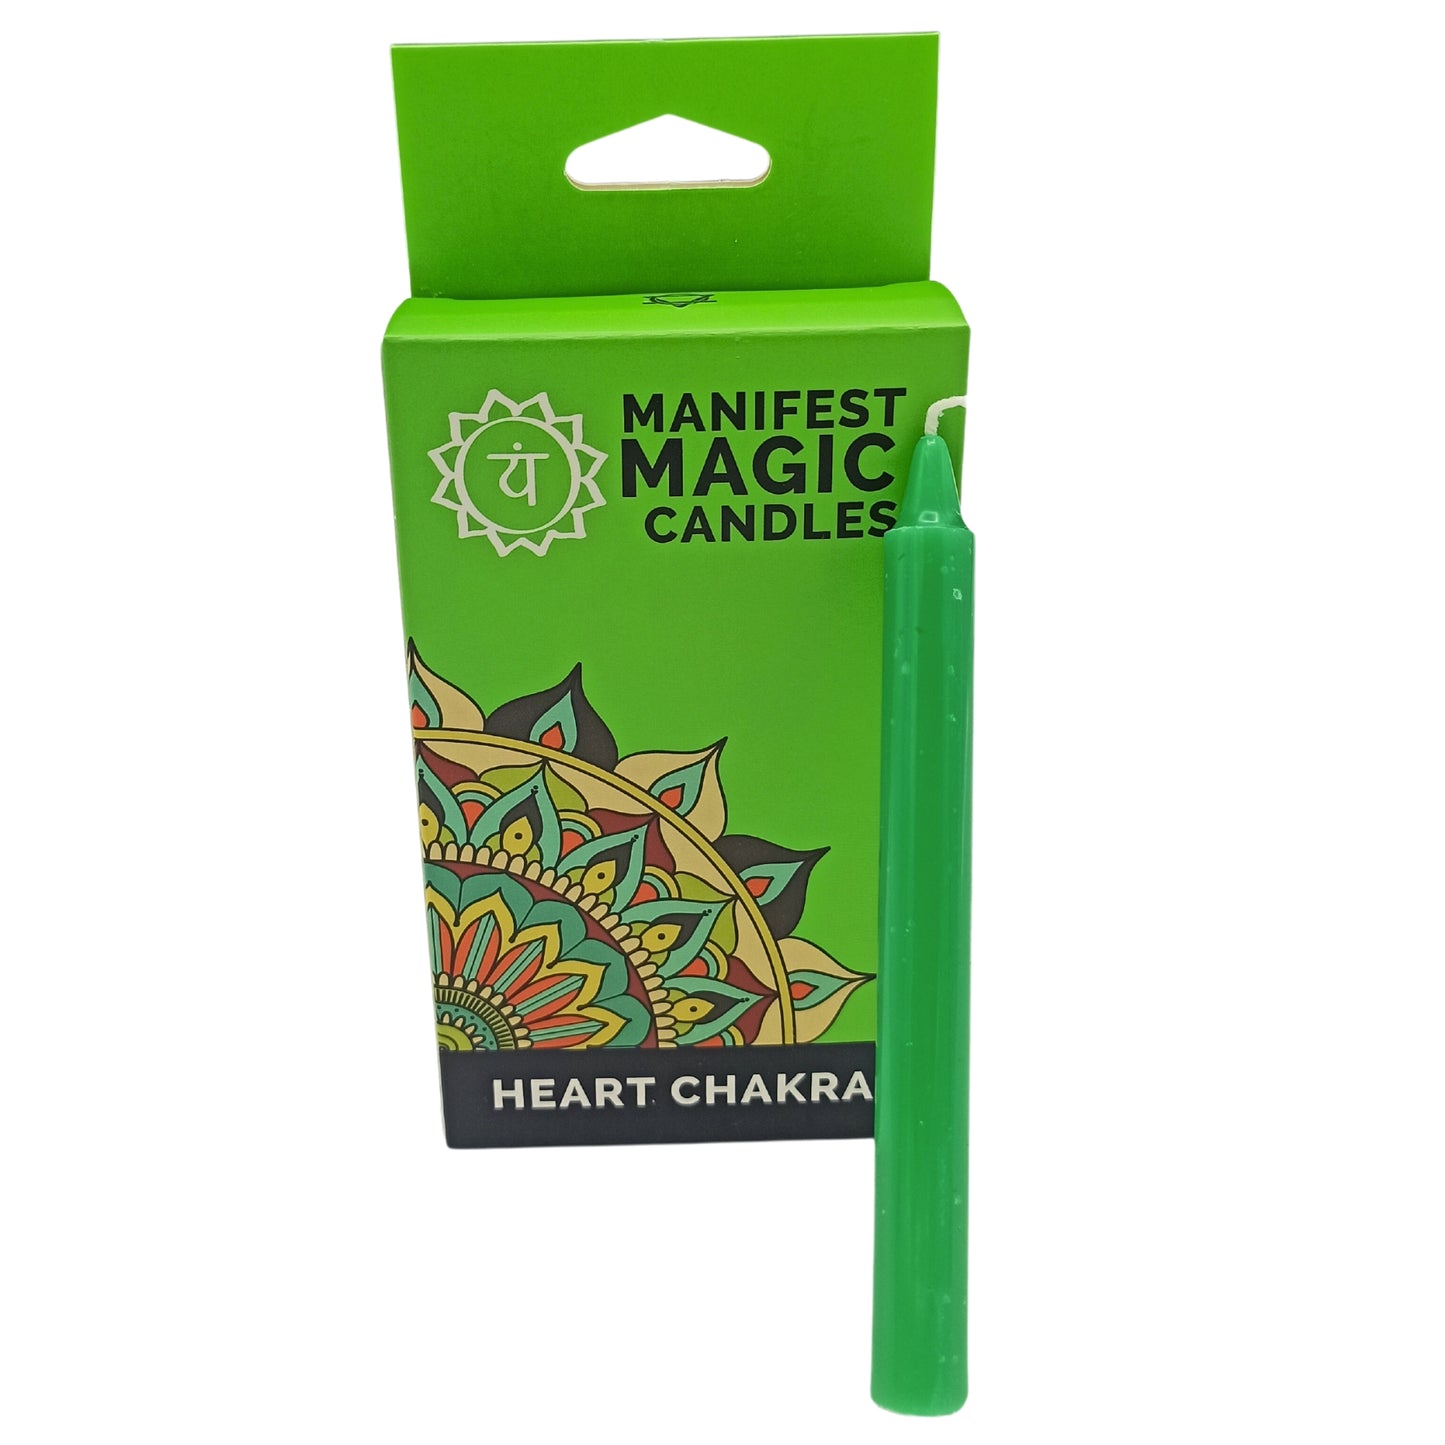 Manifest Magic Candles (pack of 12) - Green - Heart Chakra